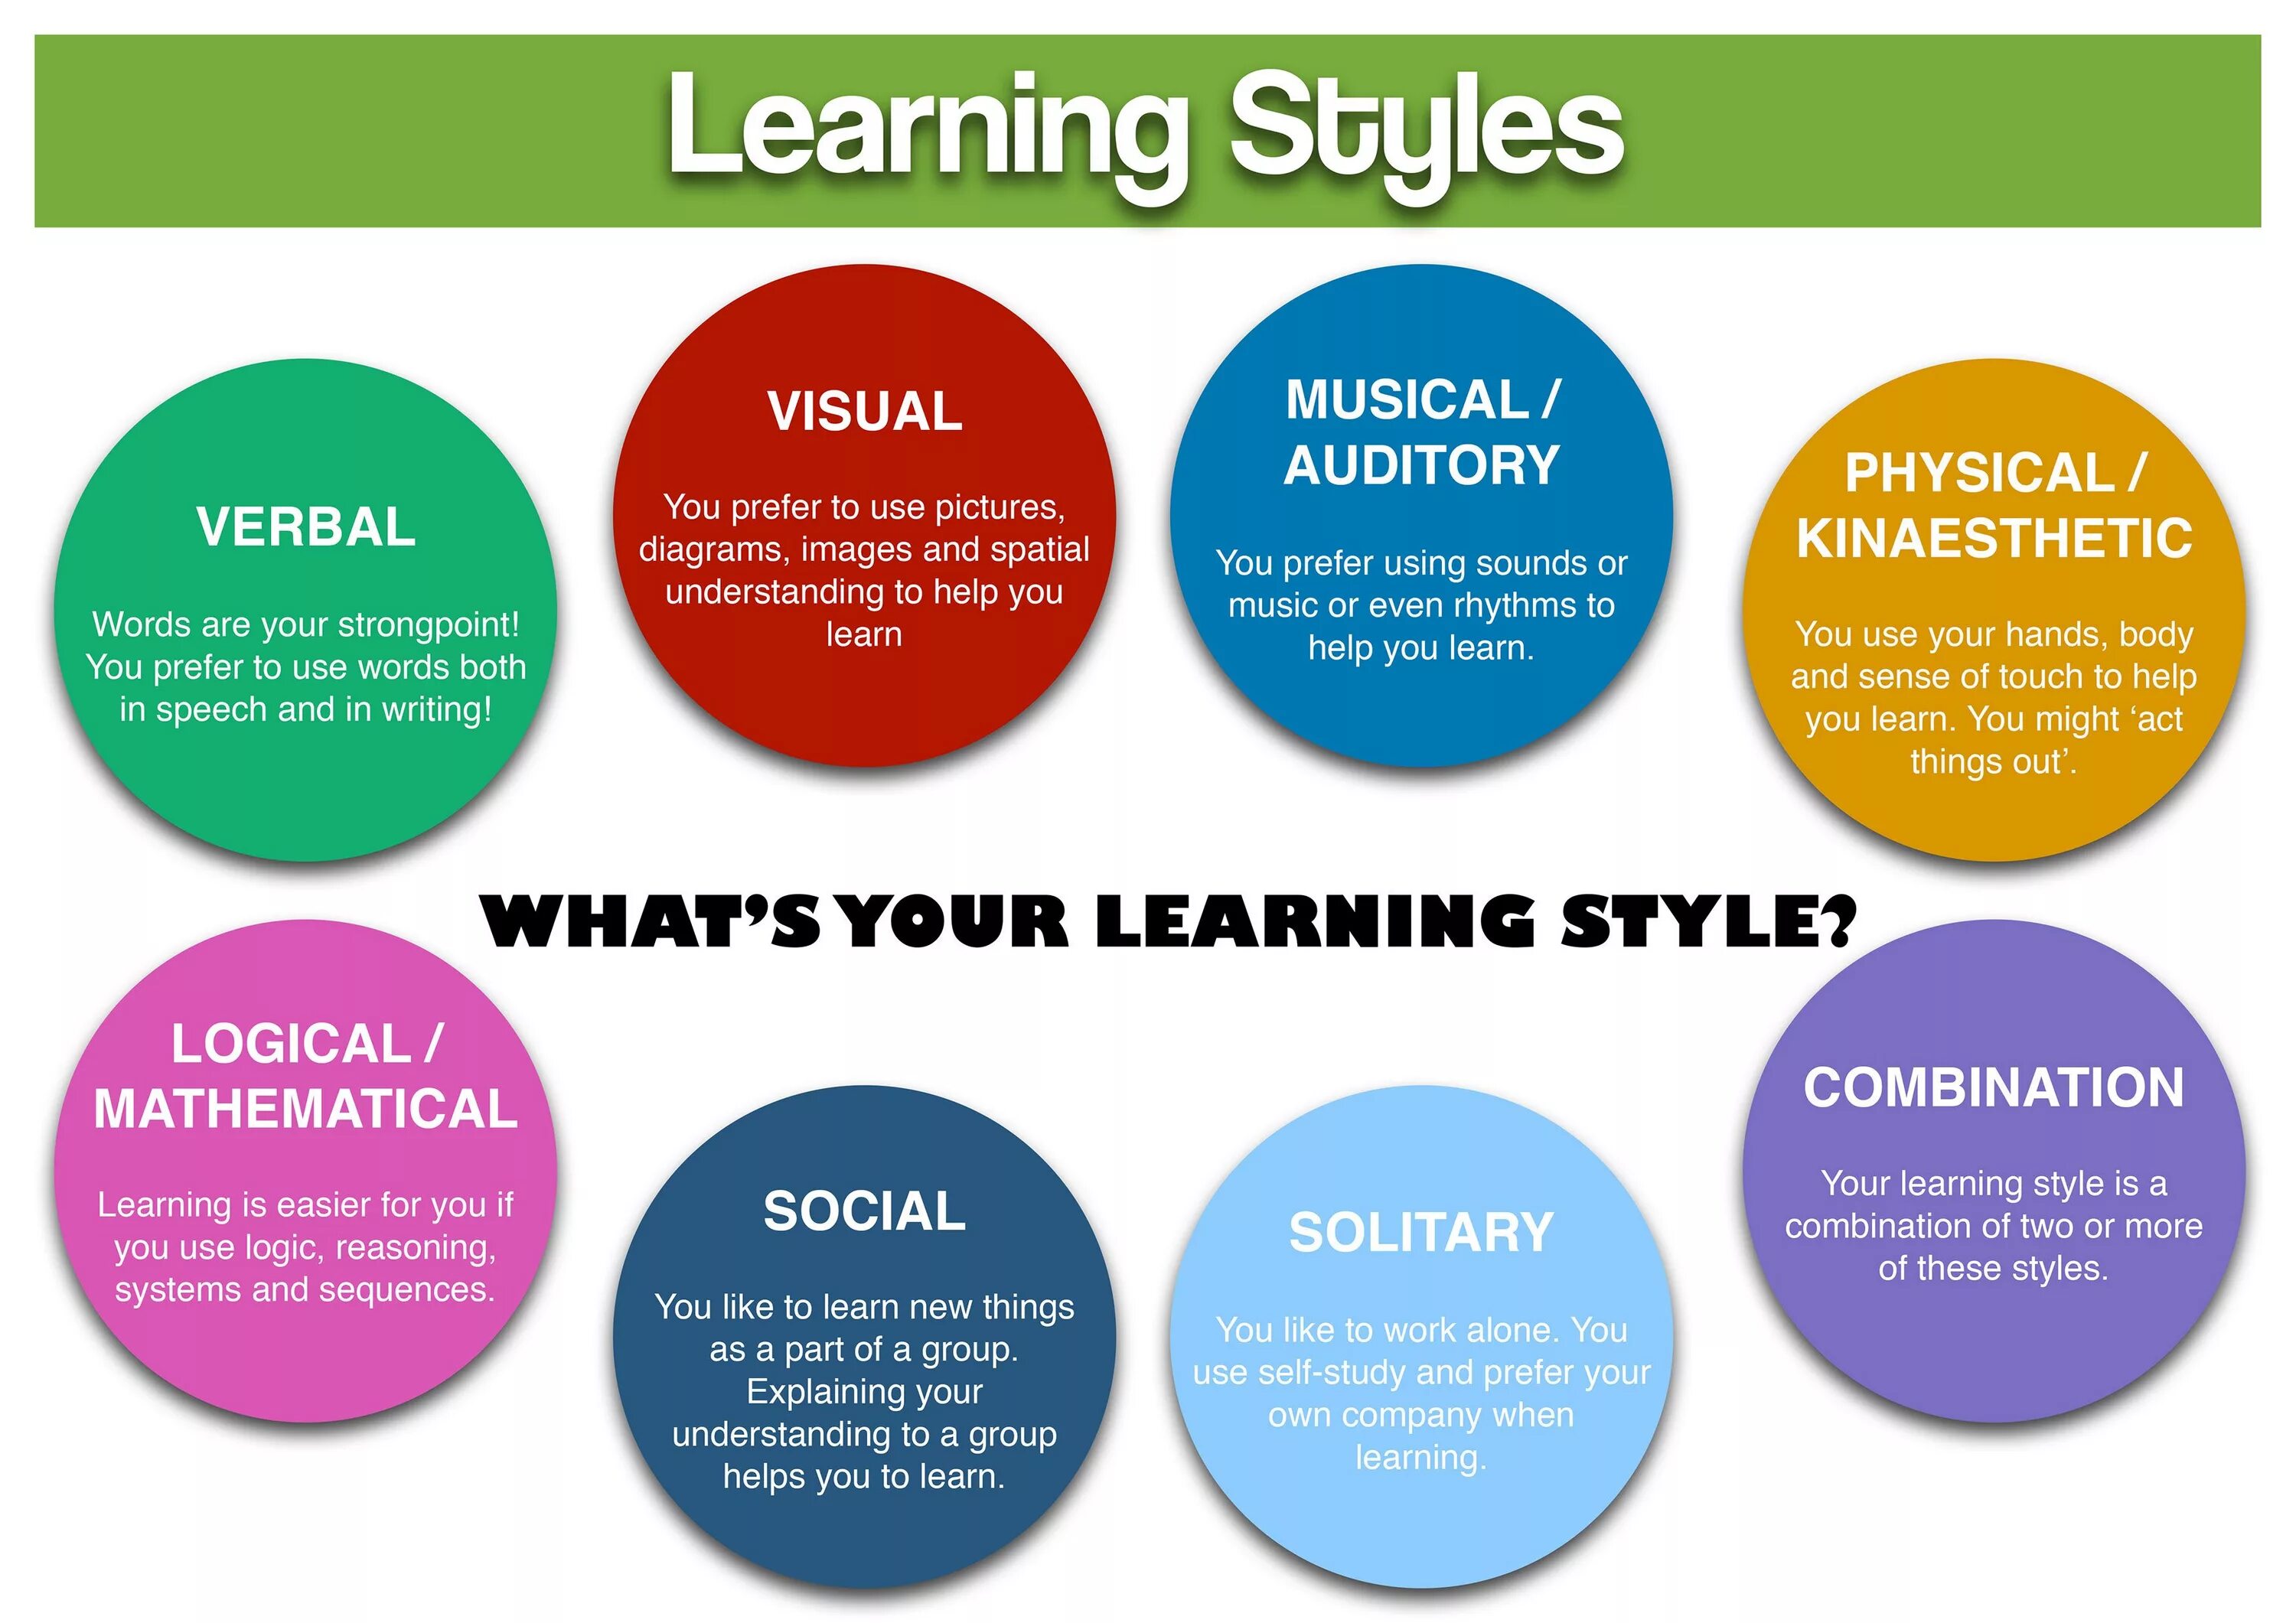 Learning Styles. Types of Learning Styles. Different Learning Styles. Learning Styles and Strategies. Should be easy